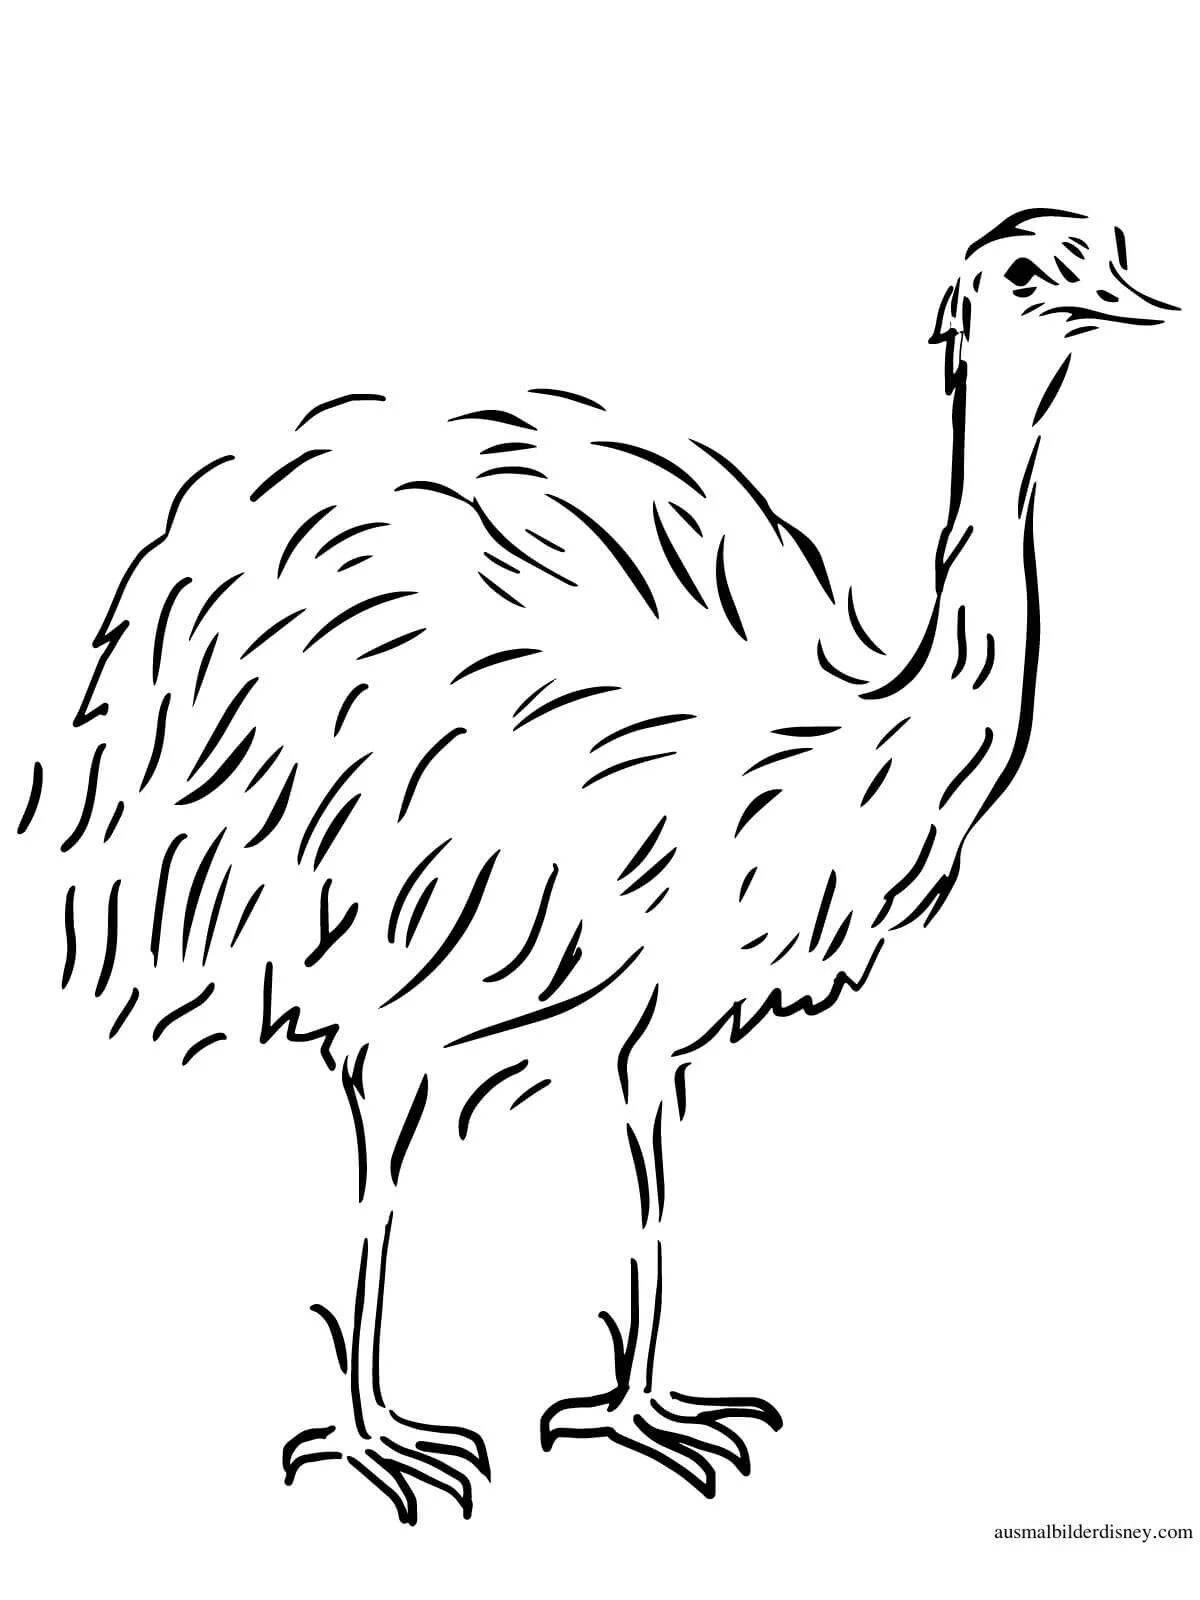 Adorable cassowary coloring book for kids